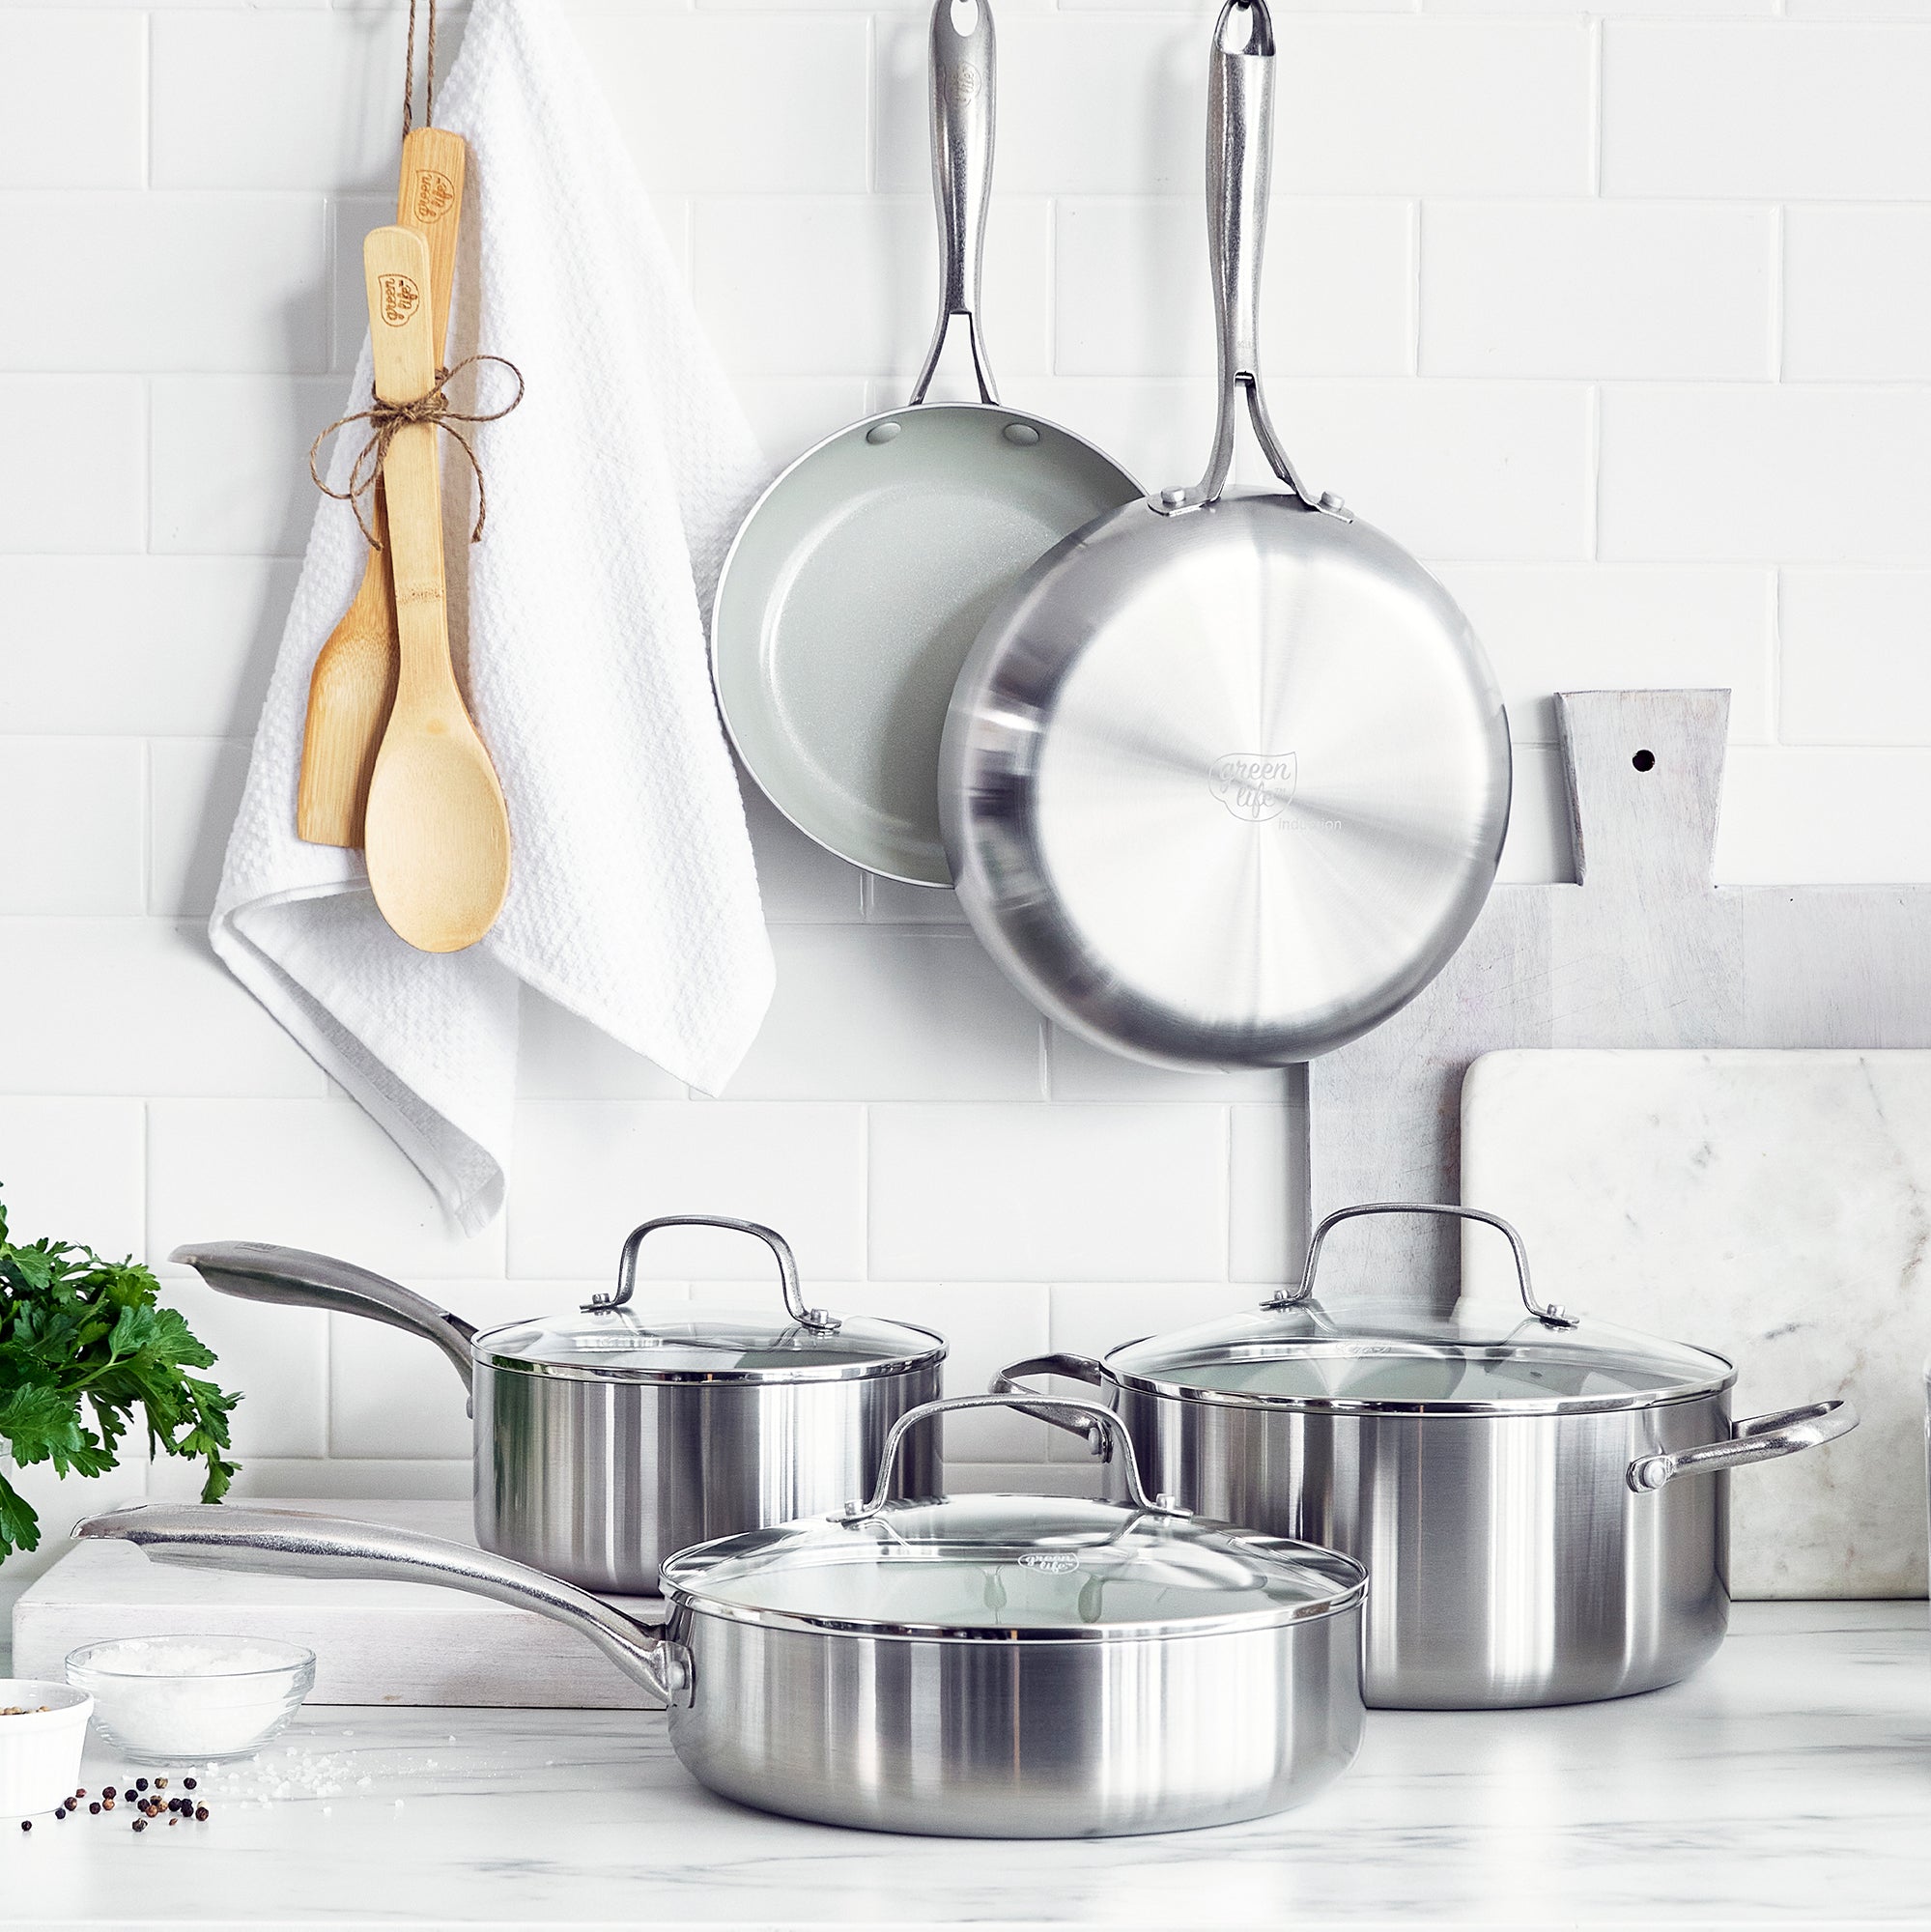 Stainless Pro 10-Piece Cookware Set